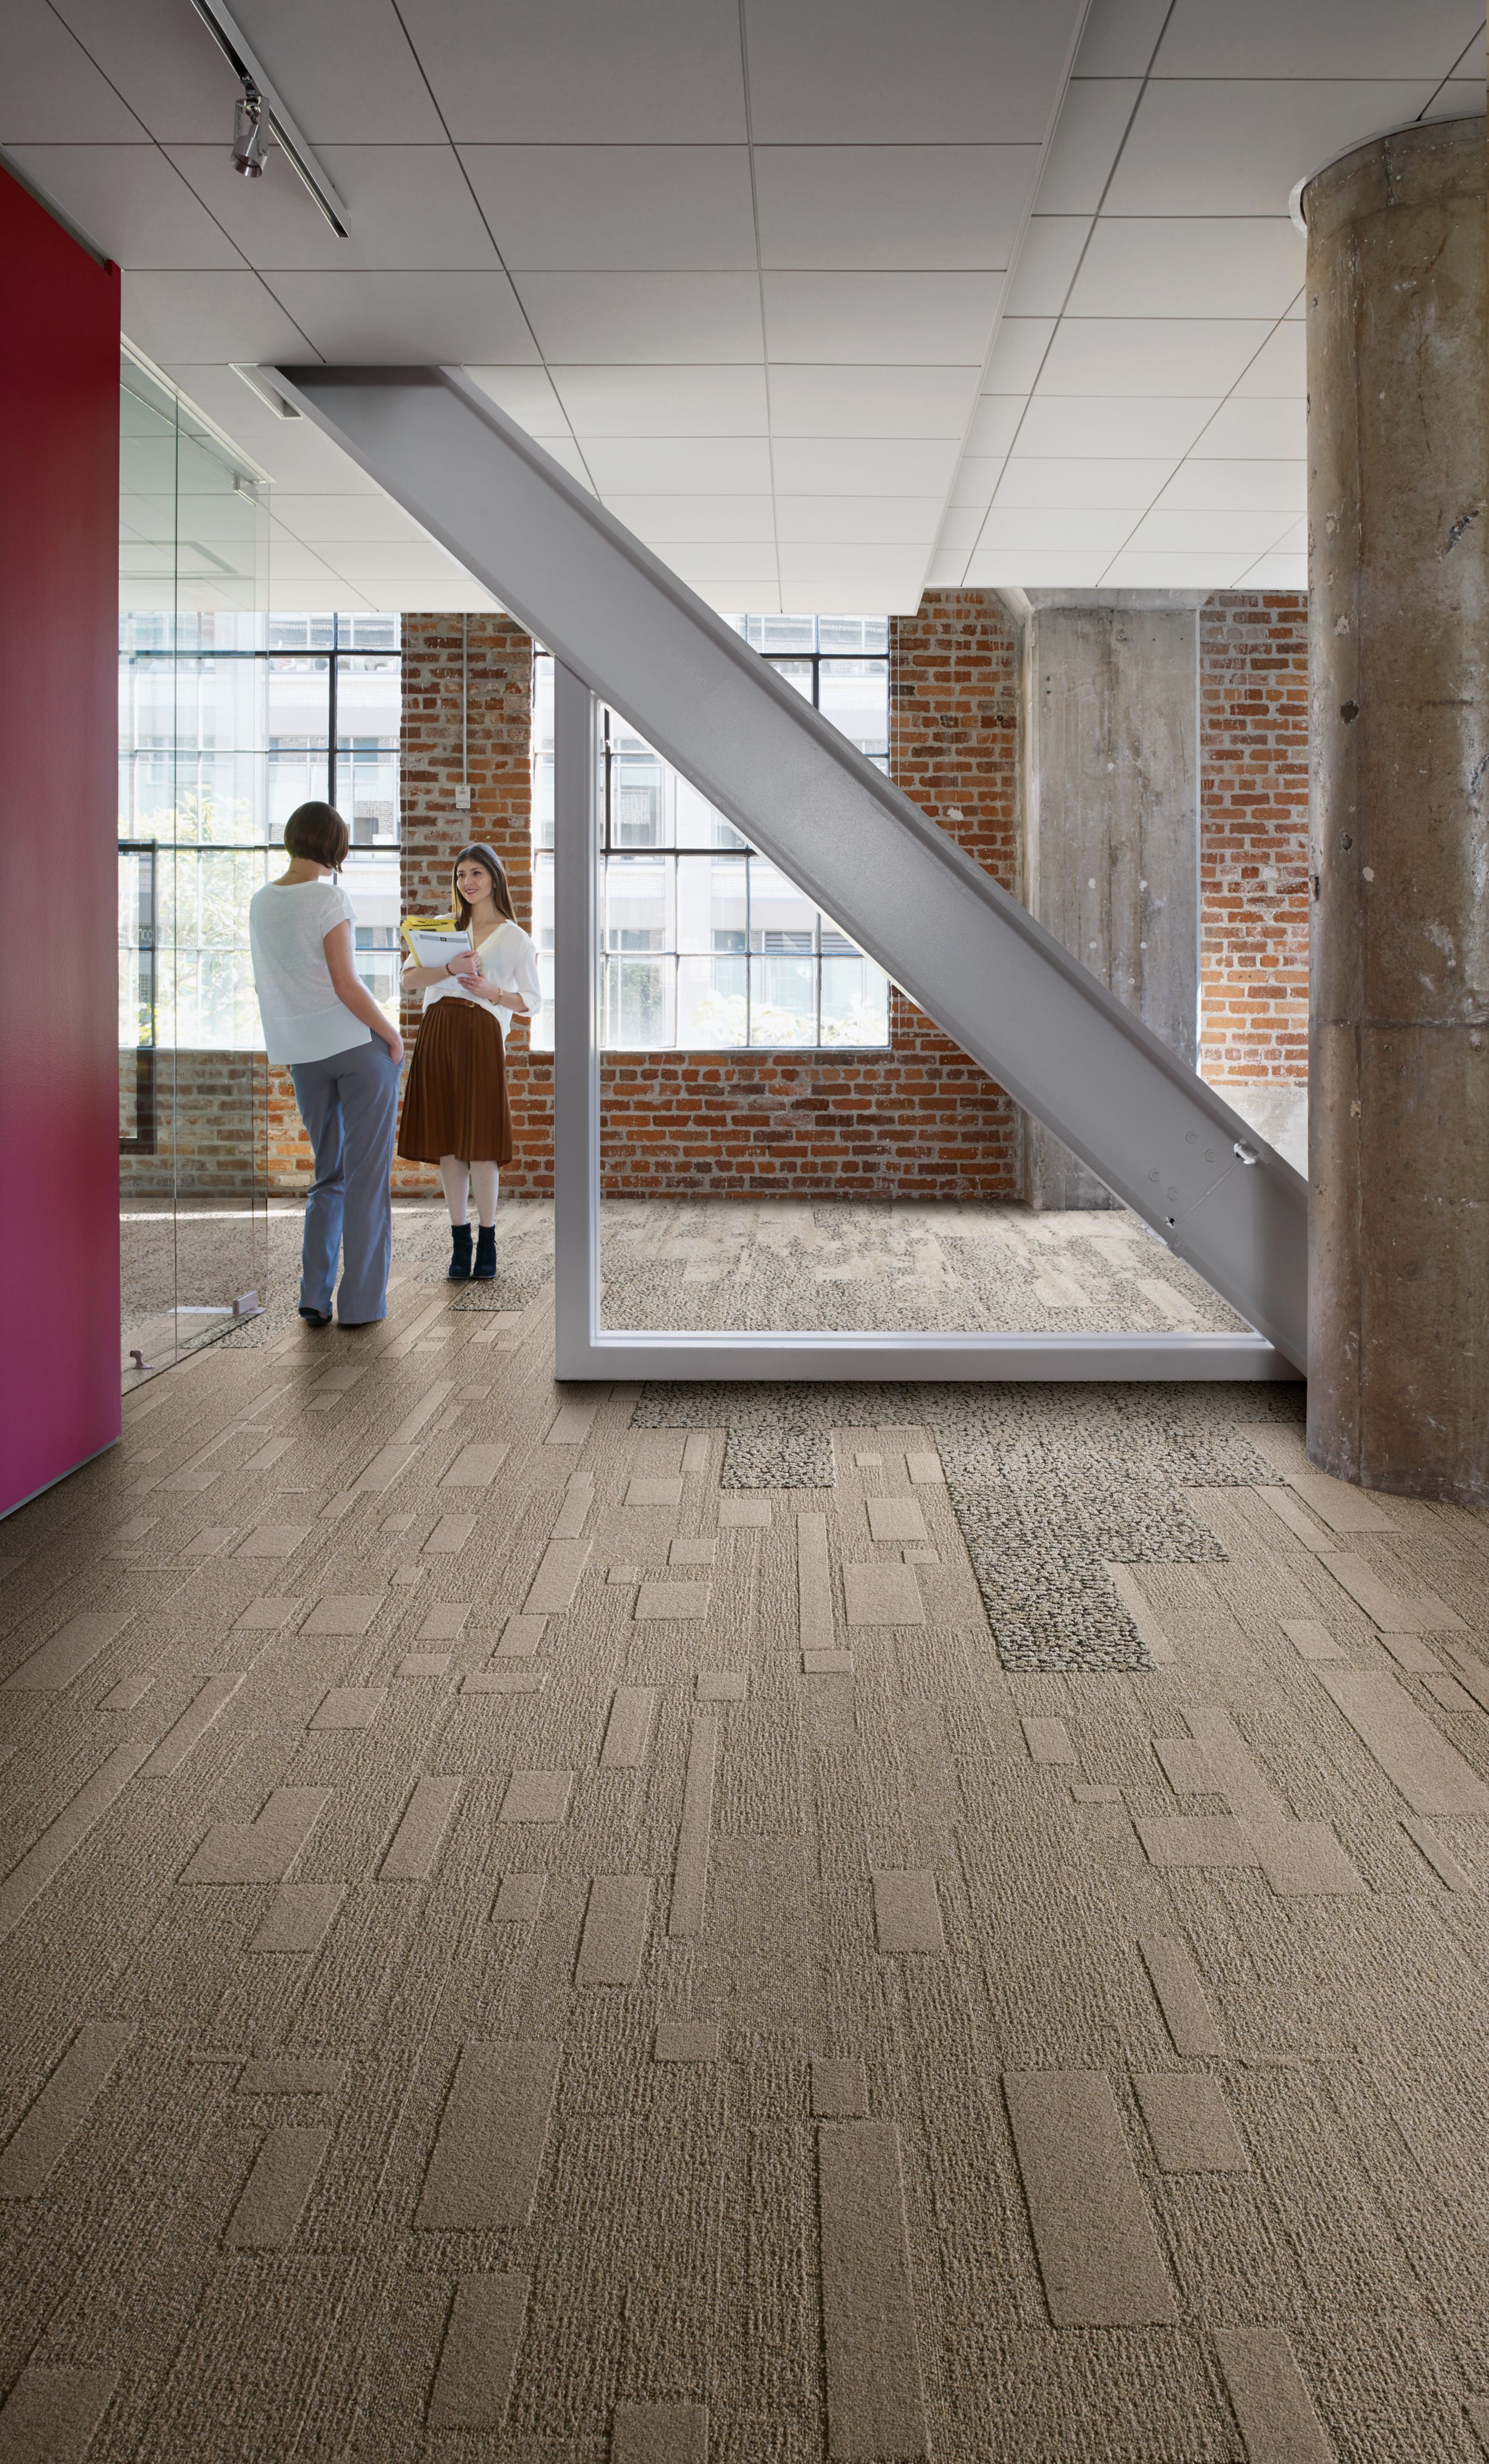 Interface EM552 plank carpet tile in with diagnal column and two women talking Bildnummer 7